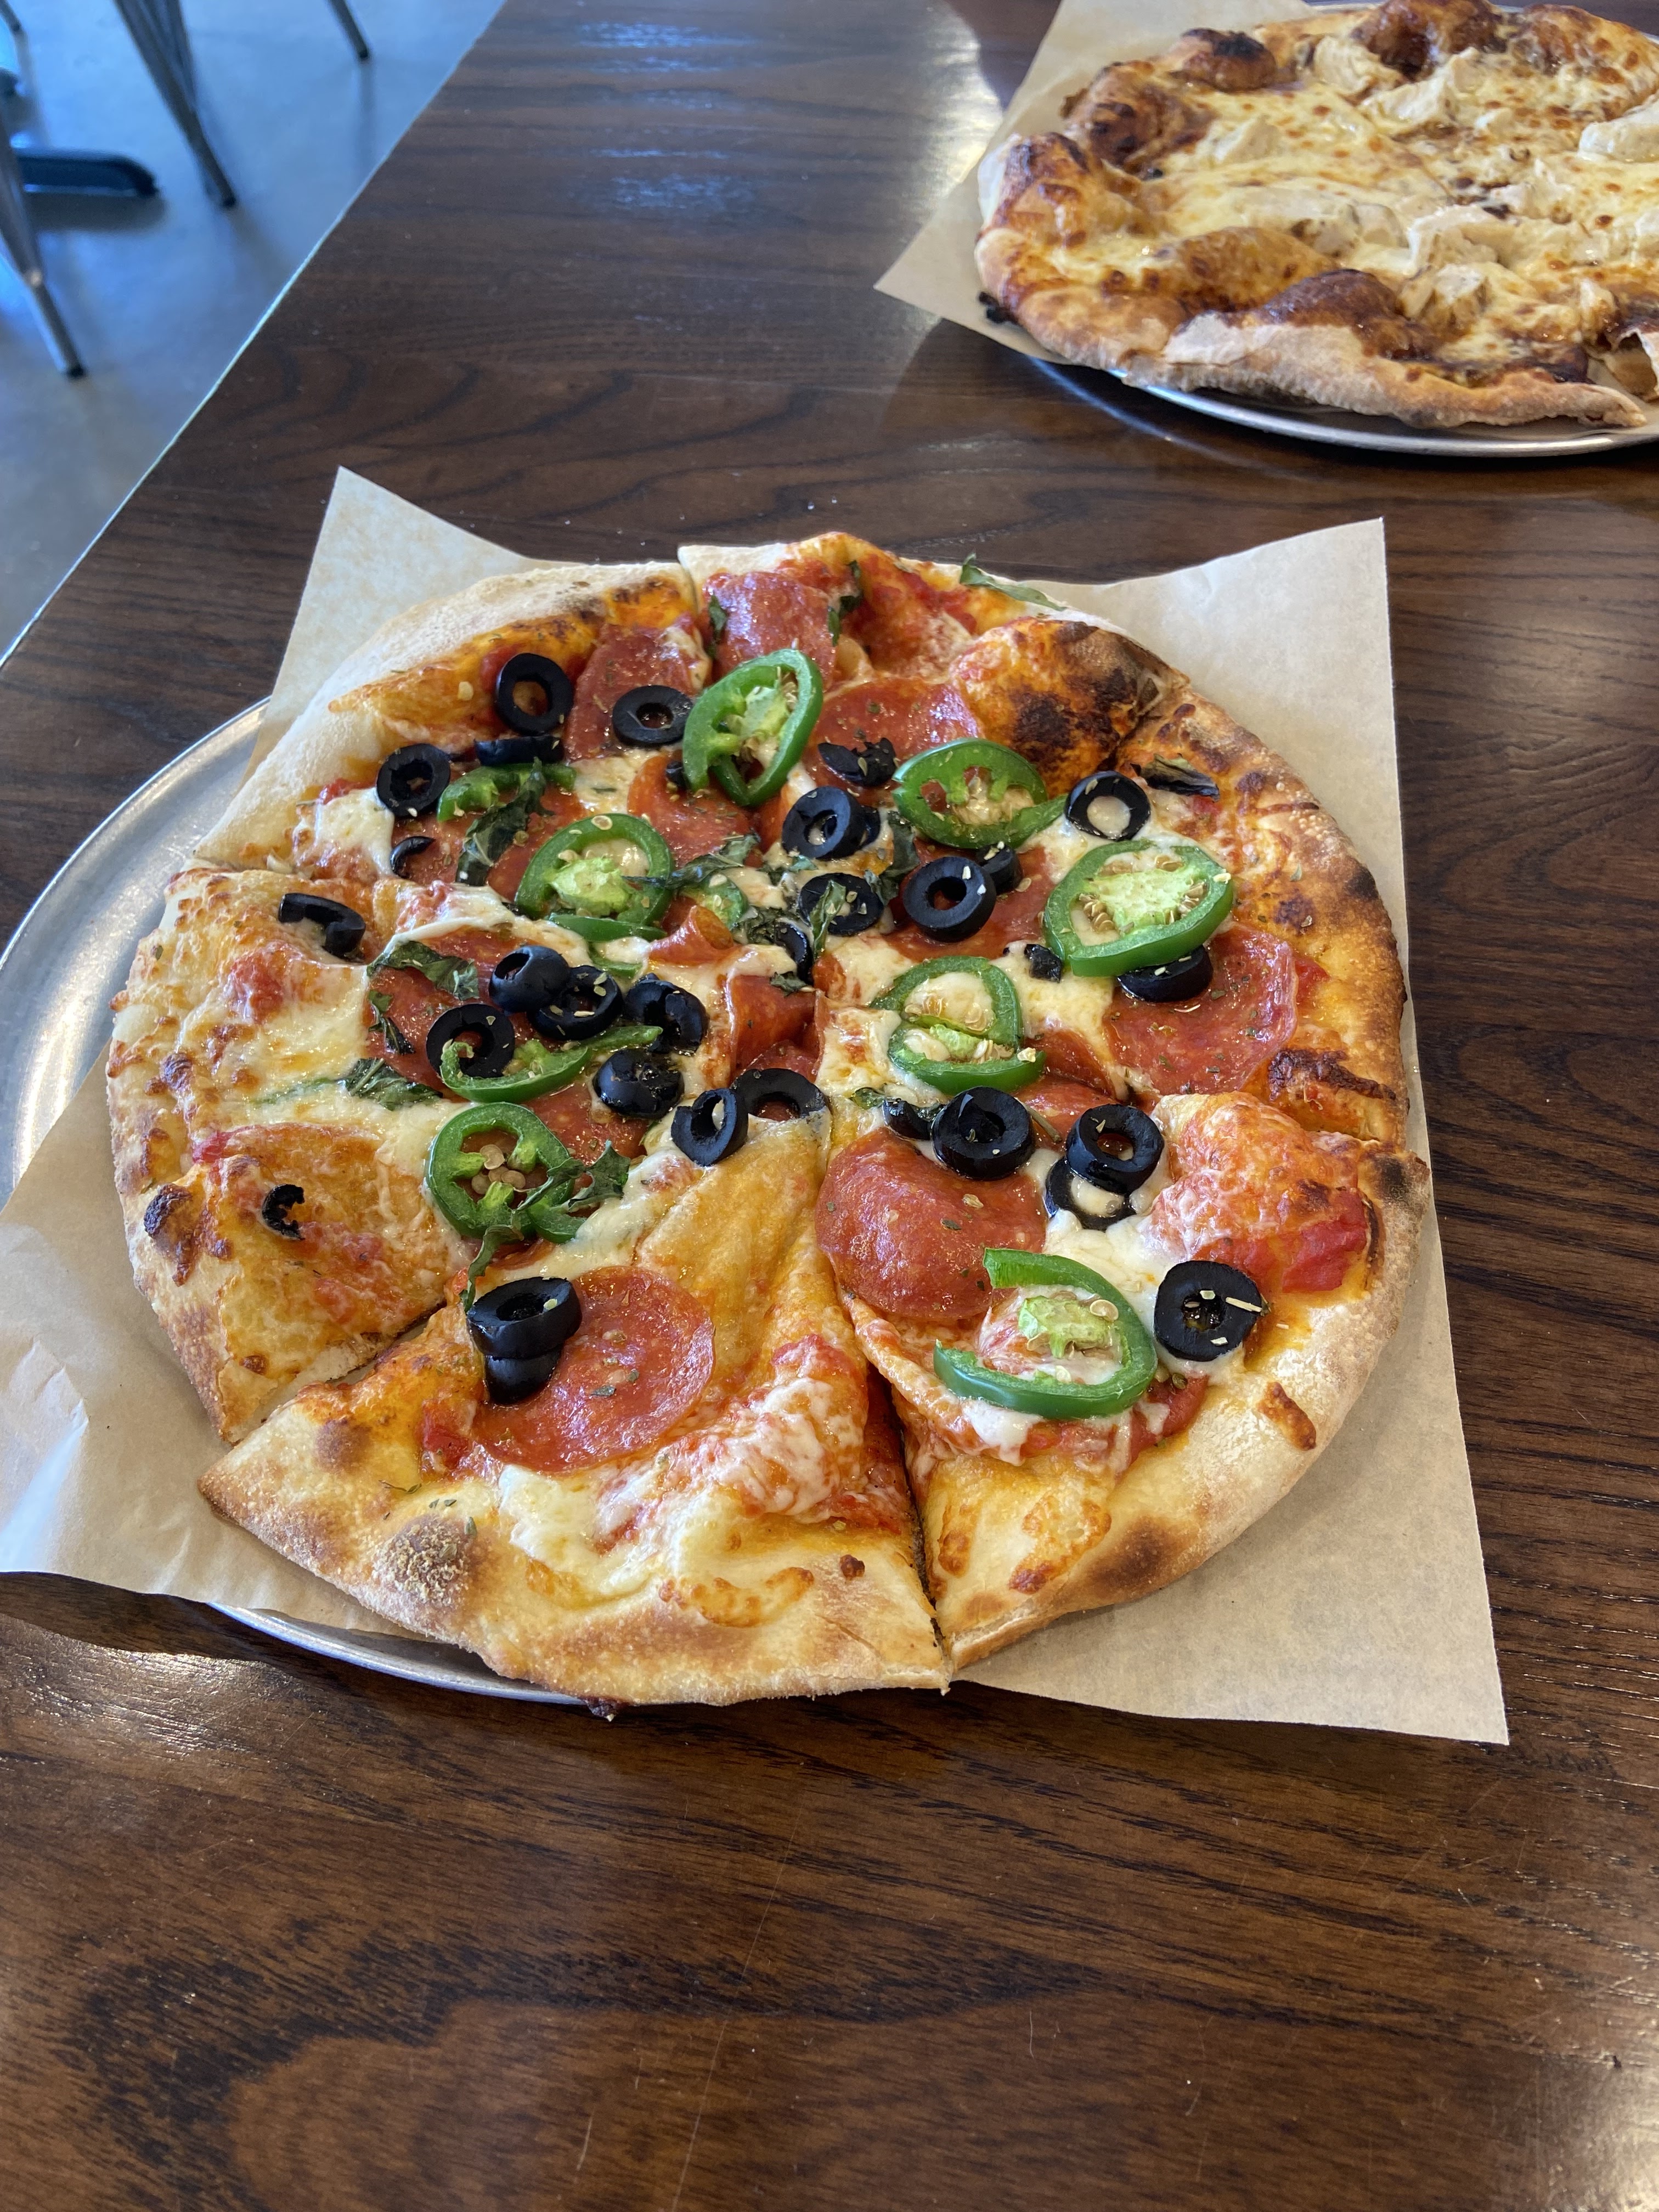 Your Pie Pizza - Brandon (FL 33511), US, nearest pizza delivery to me